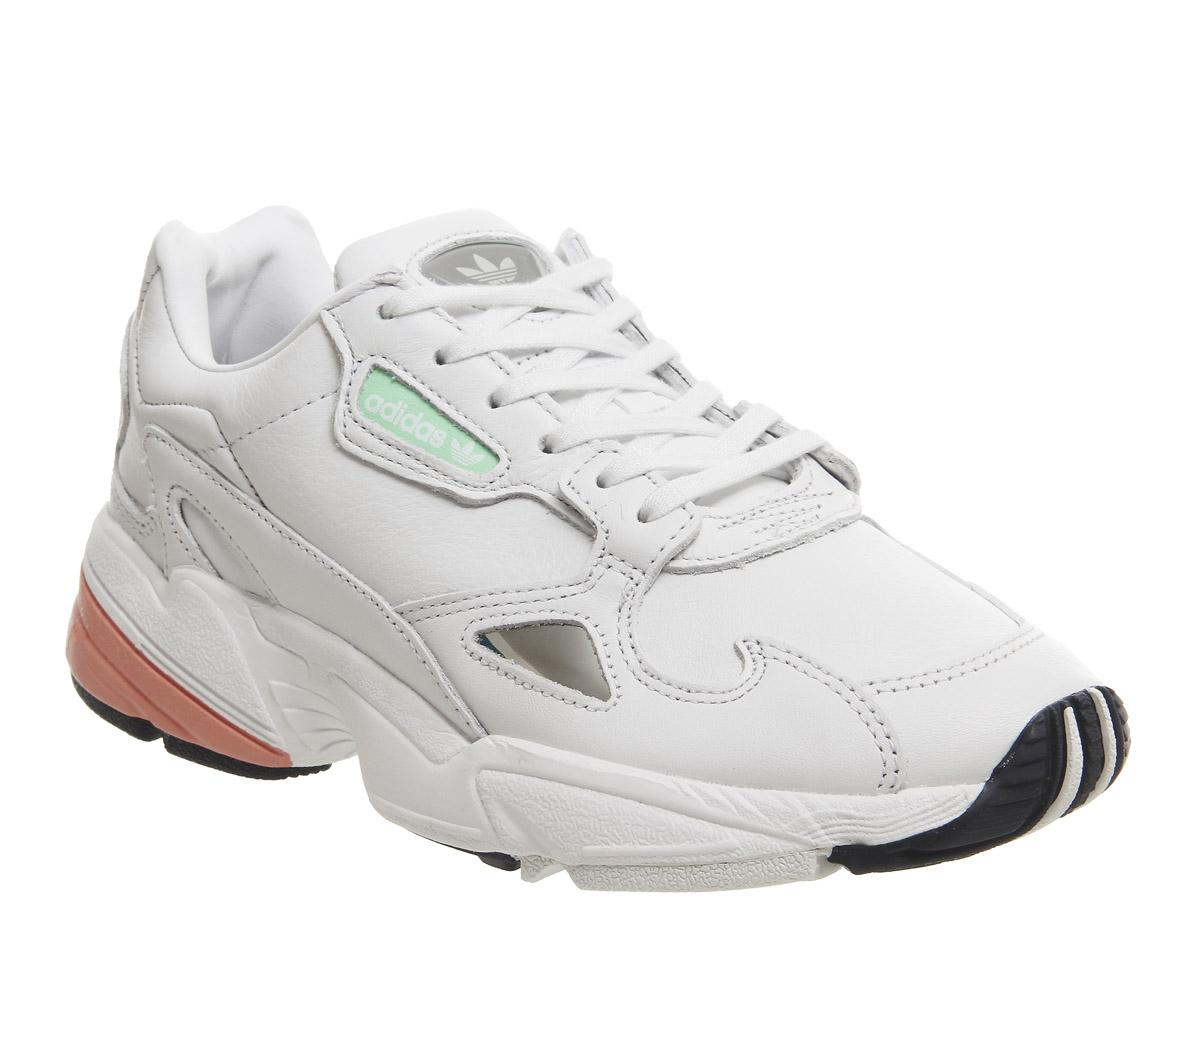 adidas Falcon Trainers Crystal White Easy Orange - Hers trainers